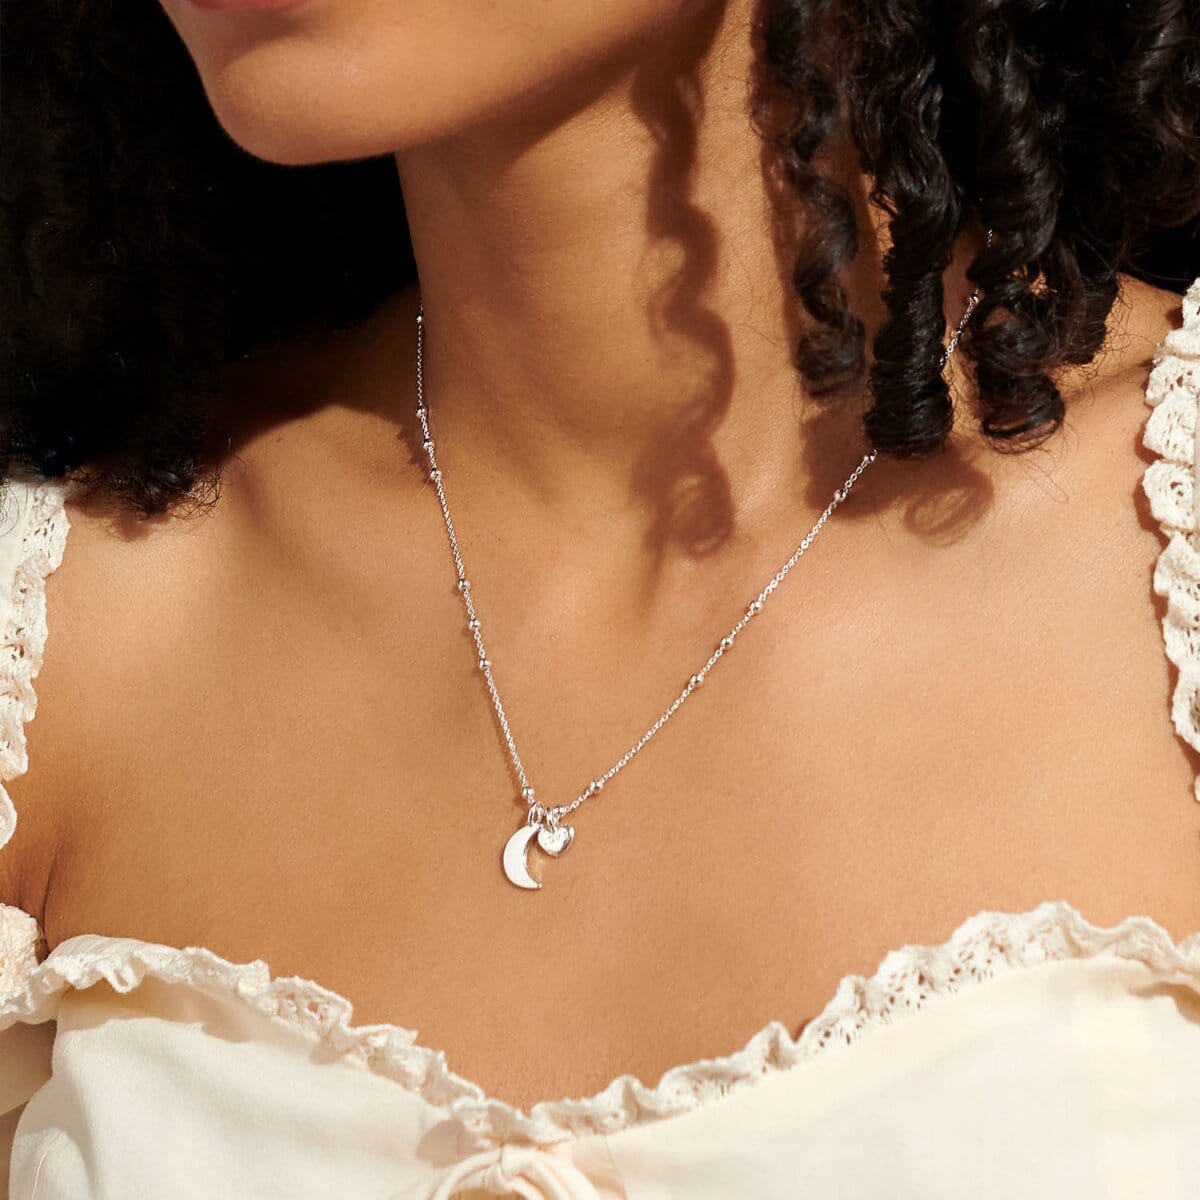 Joma Jewellery Necklaces Joma Jewellery Necklace - A Little Love You To The Moon & Back Mum